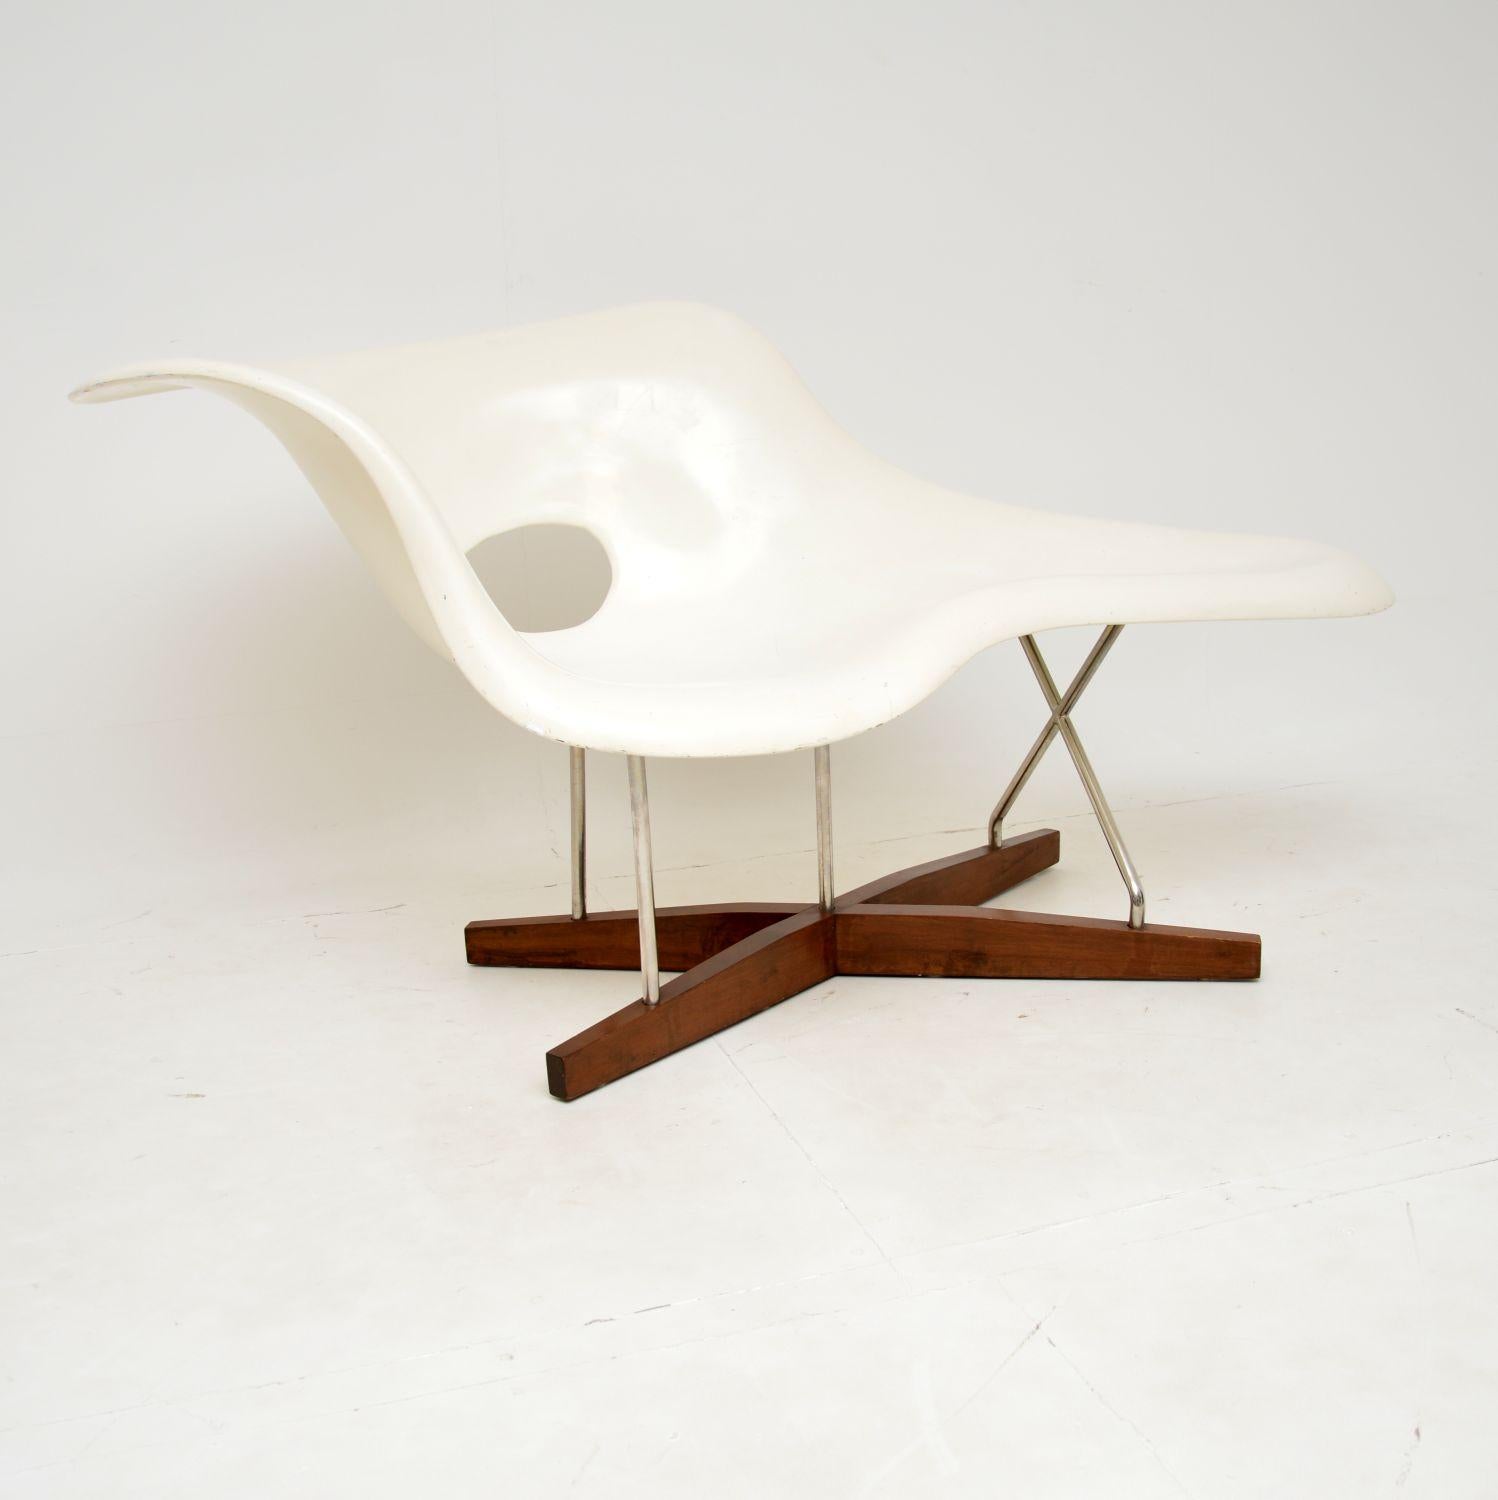 A super stylish and iconic design, this is a vintage reproduction of the Charles & Ray Eames La Chaise longue, we would date it from around the 1970-80’s.

Charles and Ray Eames originally designed this for a competition at the Museum of Modern